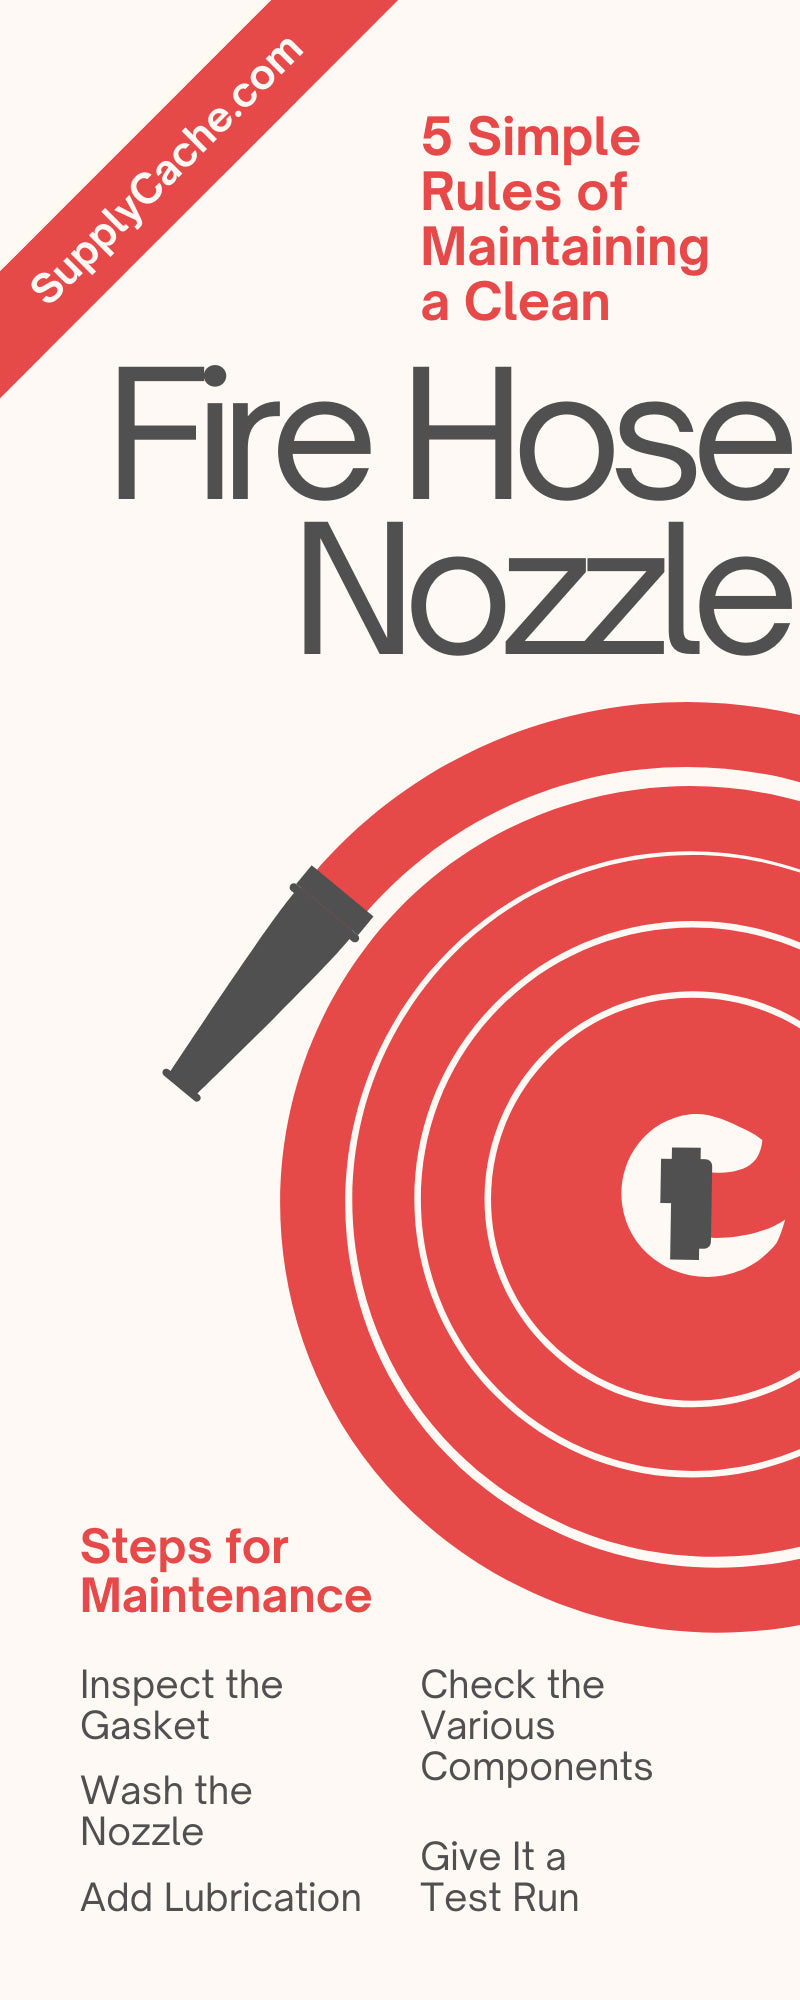 5 Simple Rules of Maintaining a Clean Fire Hose Nozzle